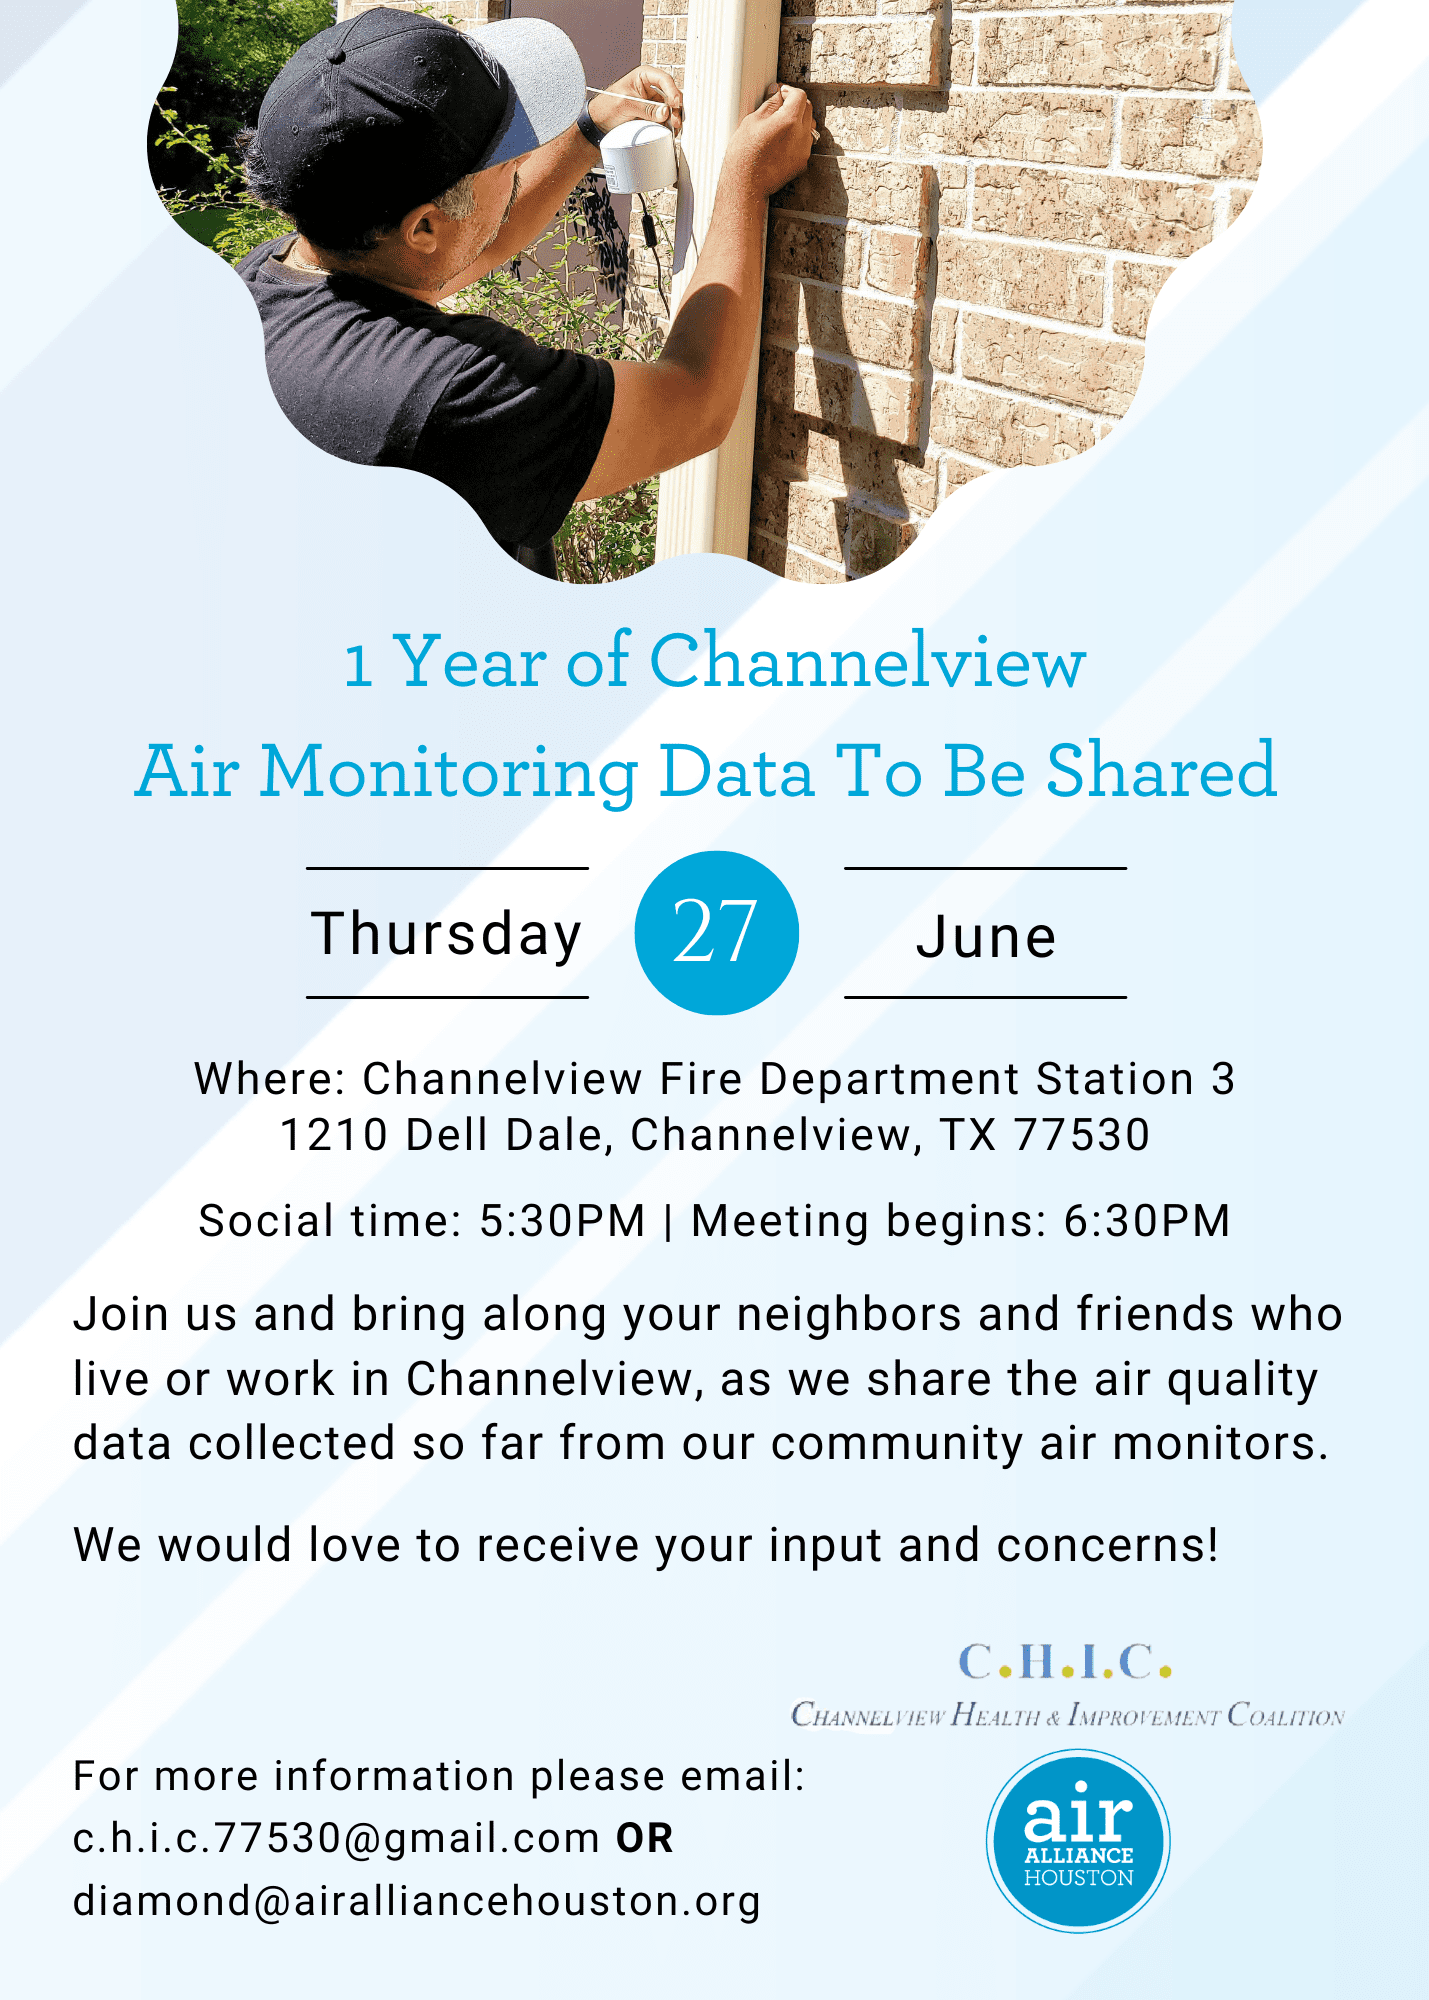 1 Year of Channelview Air Monitoring Data To Be Shared. Thursday 27 June. Where: Channelview Fire Department Station 3. 1210 Dell Dale, Channelview, TX 77530. Social time: 5:30PM | Meeting begins: 6:30PM. Join us and bring along your neighbors and friends who live or work in Channelview, as we share the air quality data collected so far from our community air monitors. We would love to receive your input and concerns! For more information please email: c.h.i.c.77530@gmail.com OR diamond@airalliancehouston.org